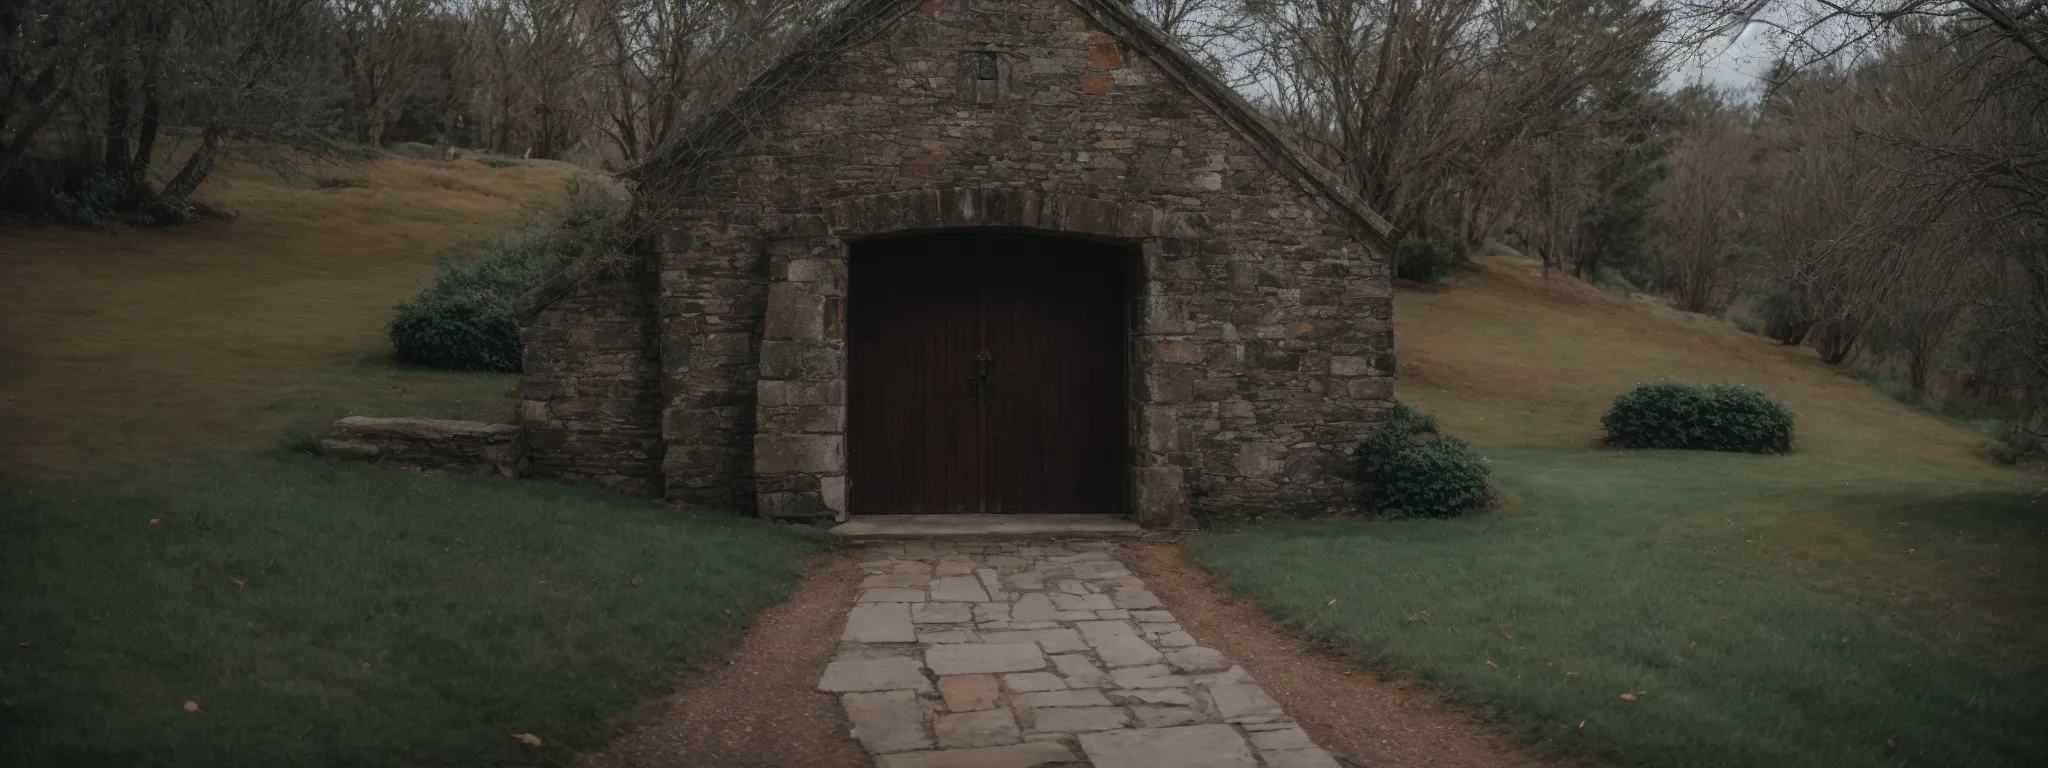 a church with an open door and a visible pathway leading to it set against a serene backdrop.